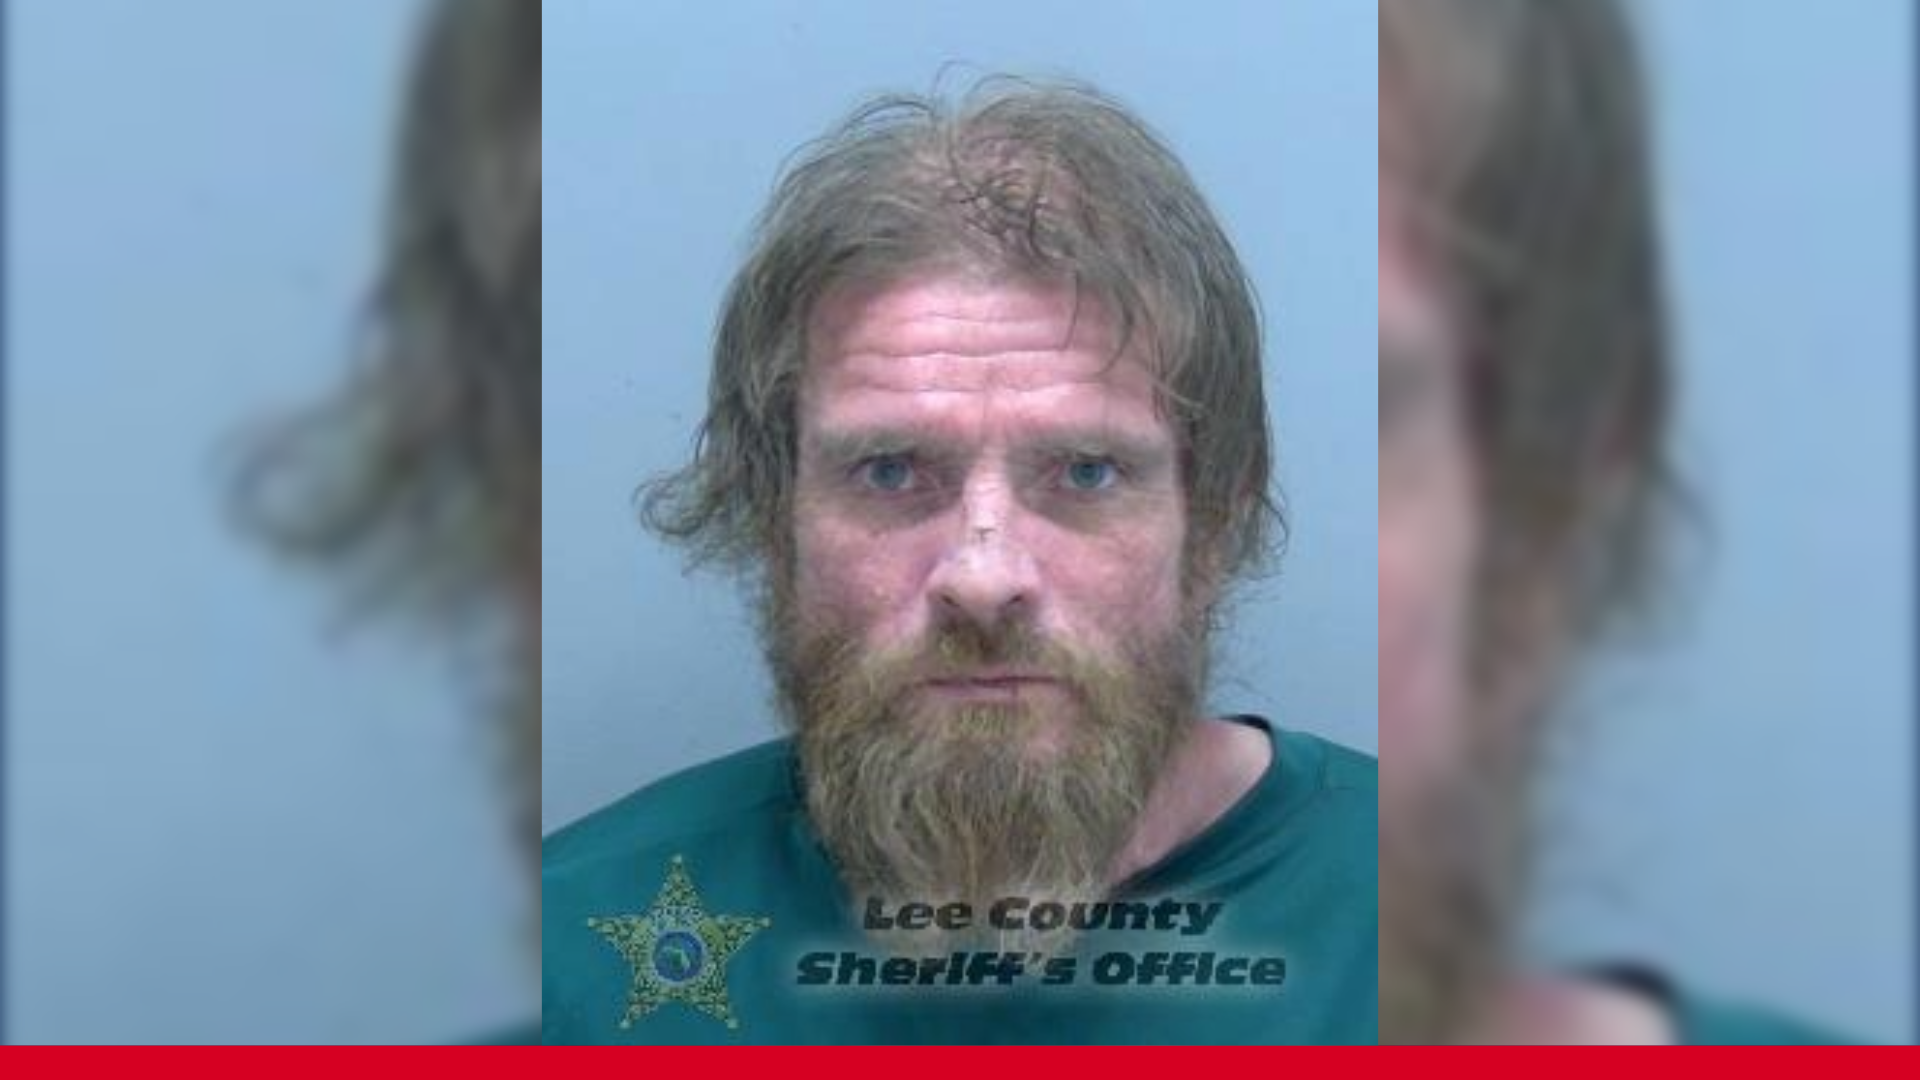 Arsonist Arrested for Setting Bush Ablaze in Front of Business